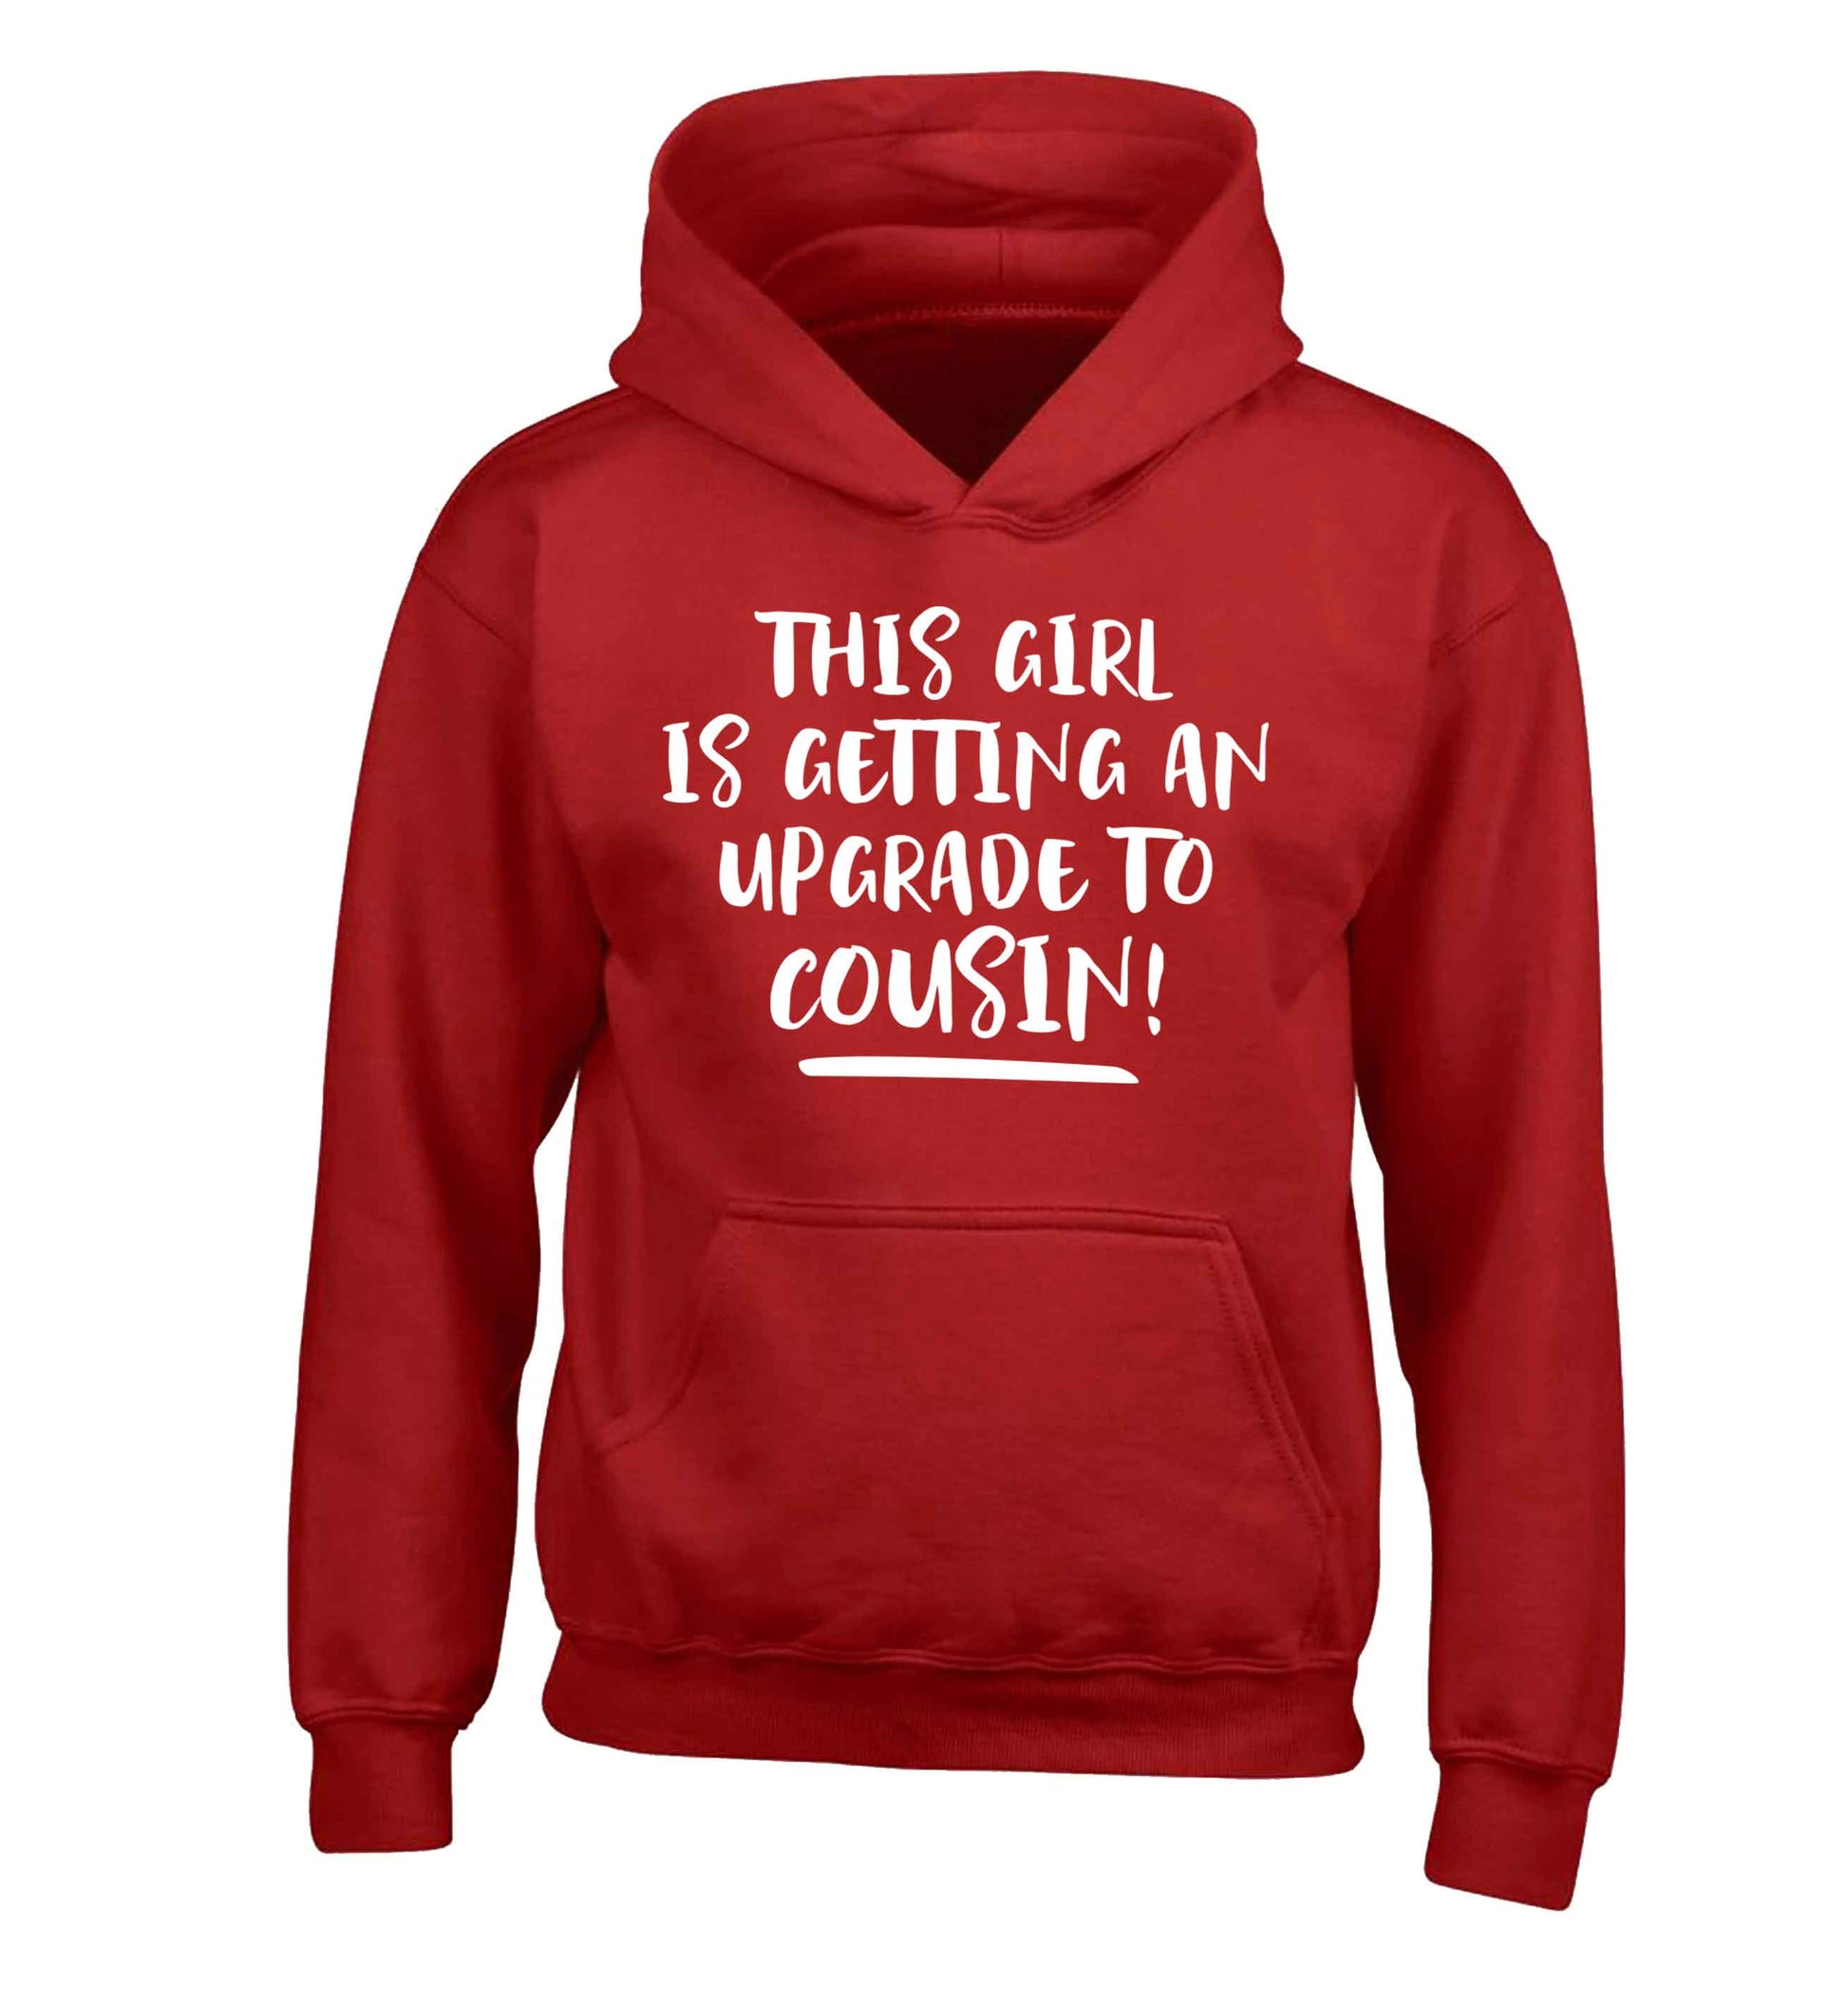 This girl is getting an upgrade to cousin! children's red hoodie 12-13 Years